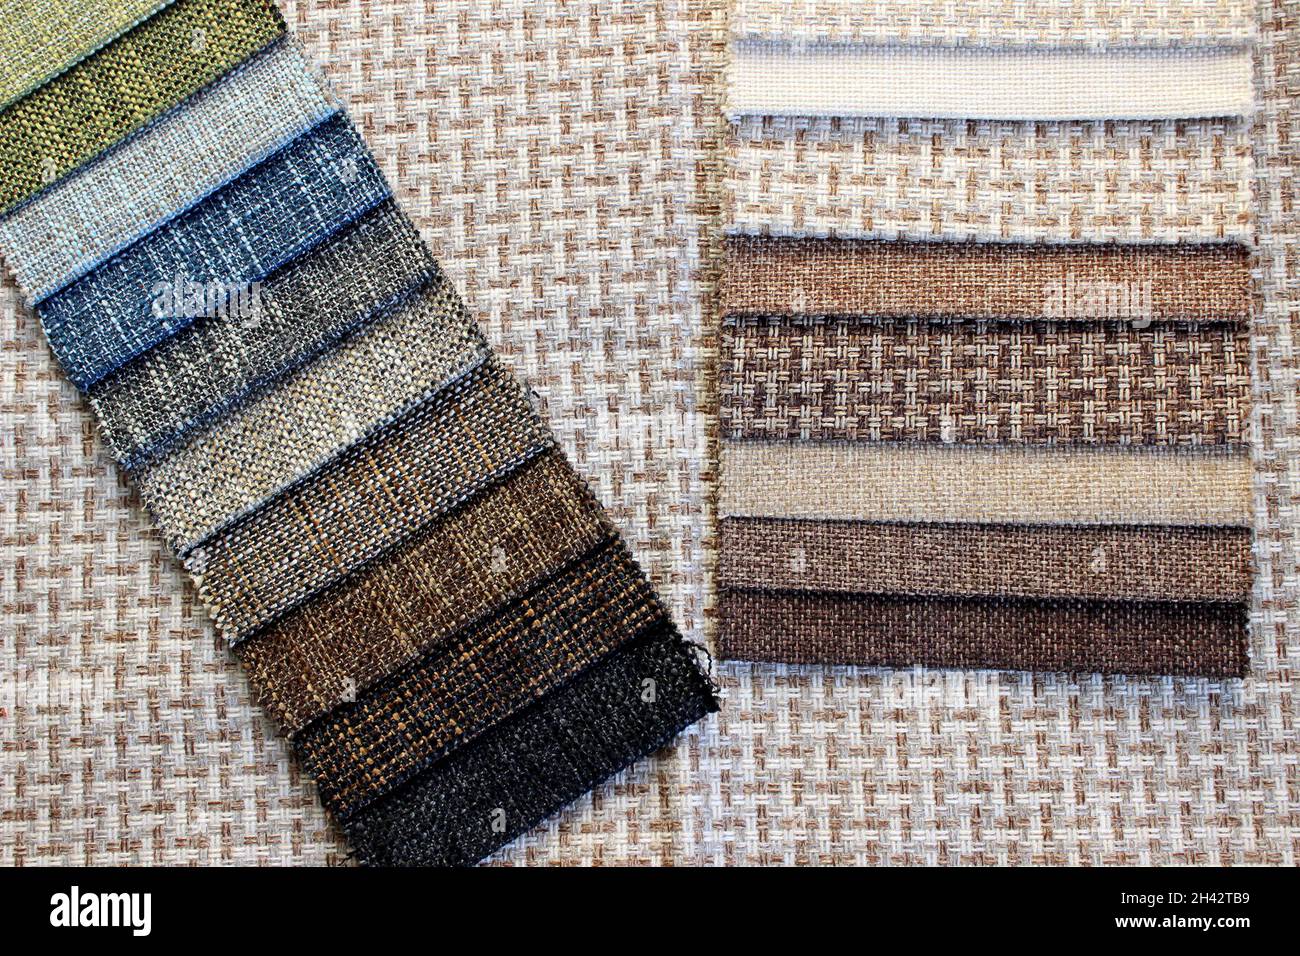 Natural & Organic Fabrics for Upholstery 